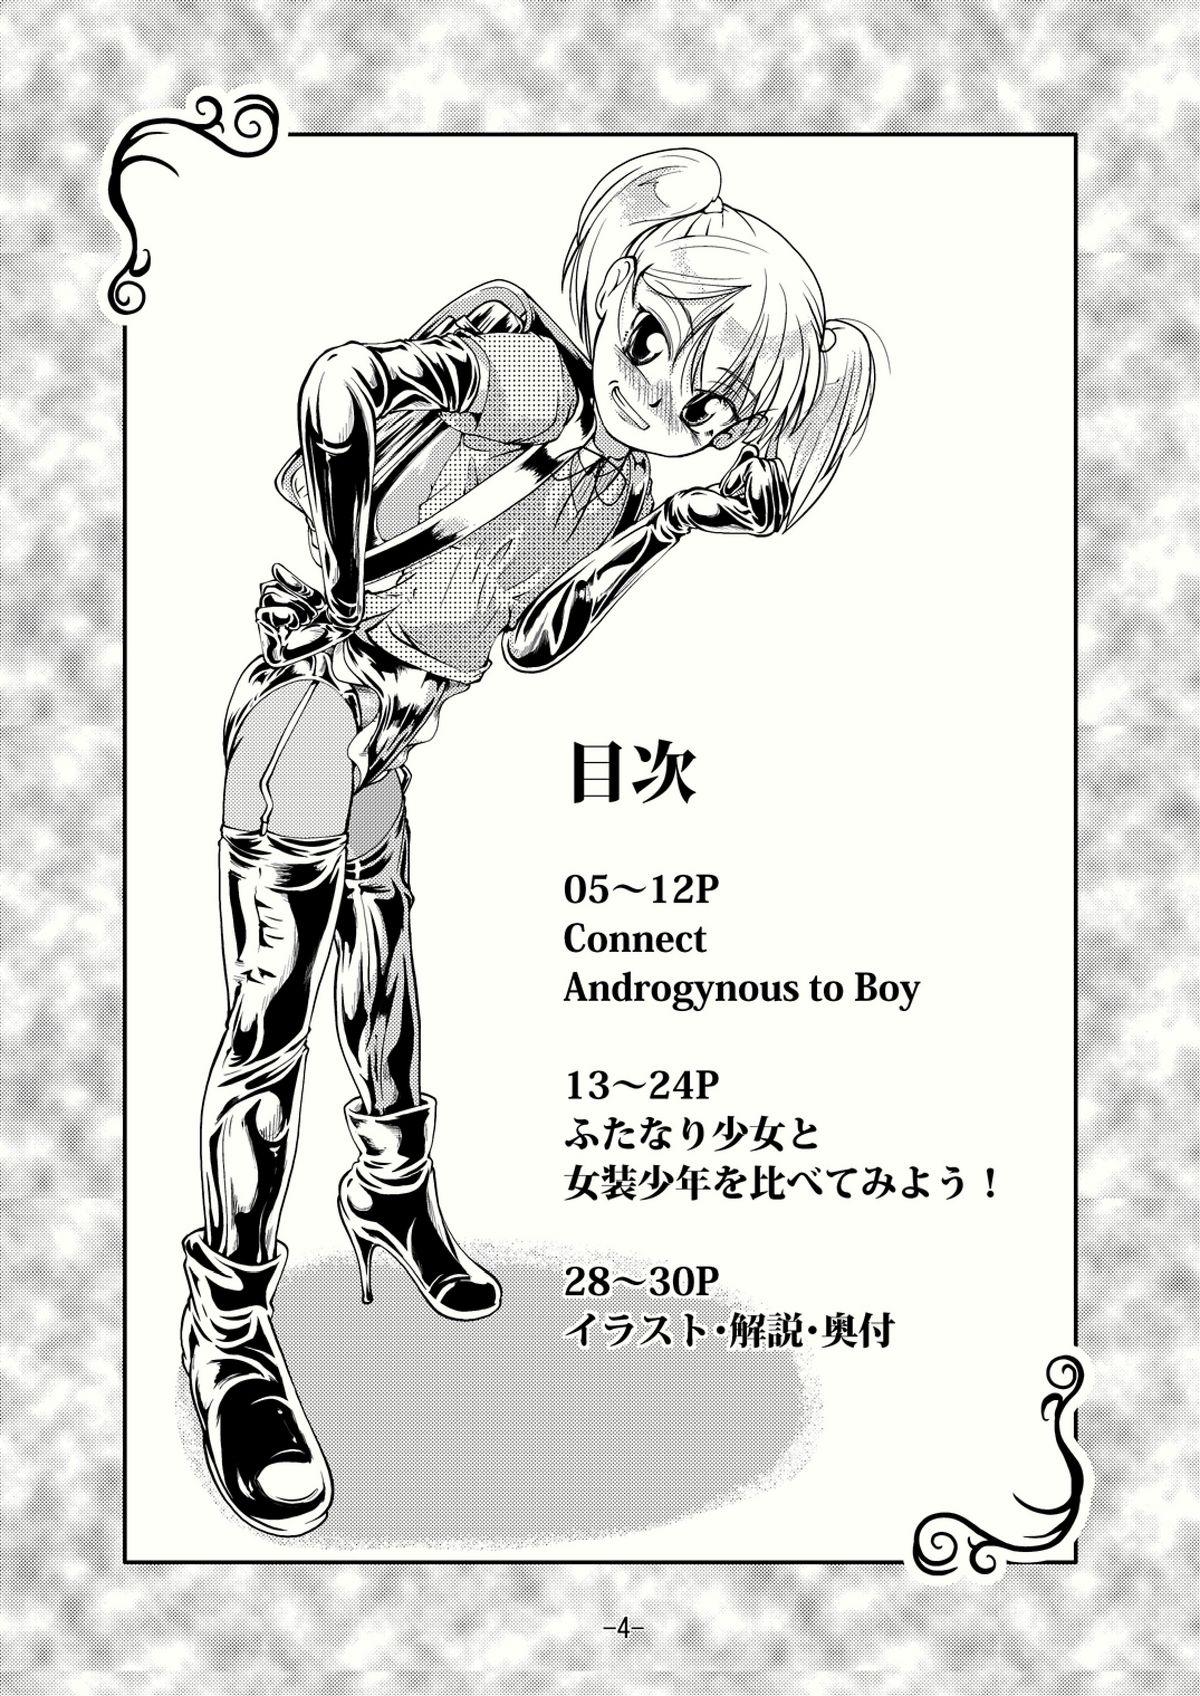 Connect Androgynous to Boy 2